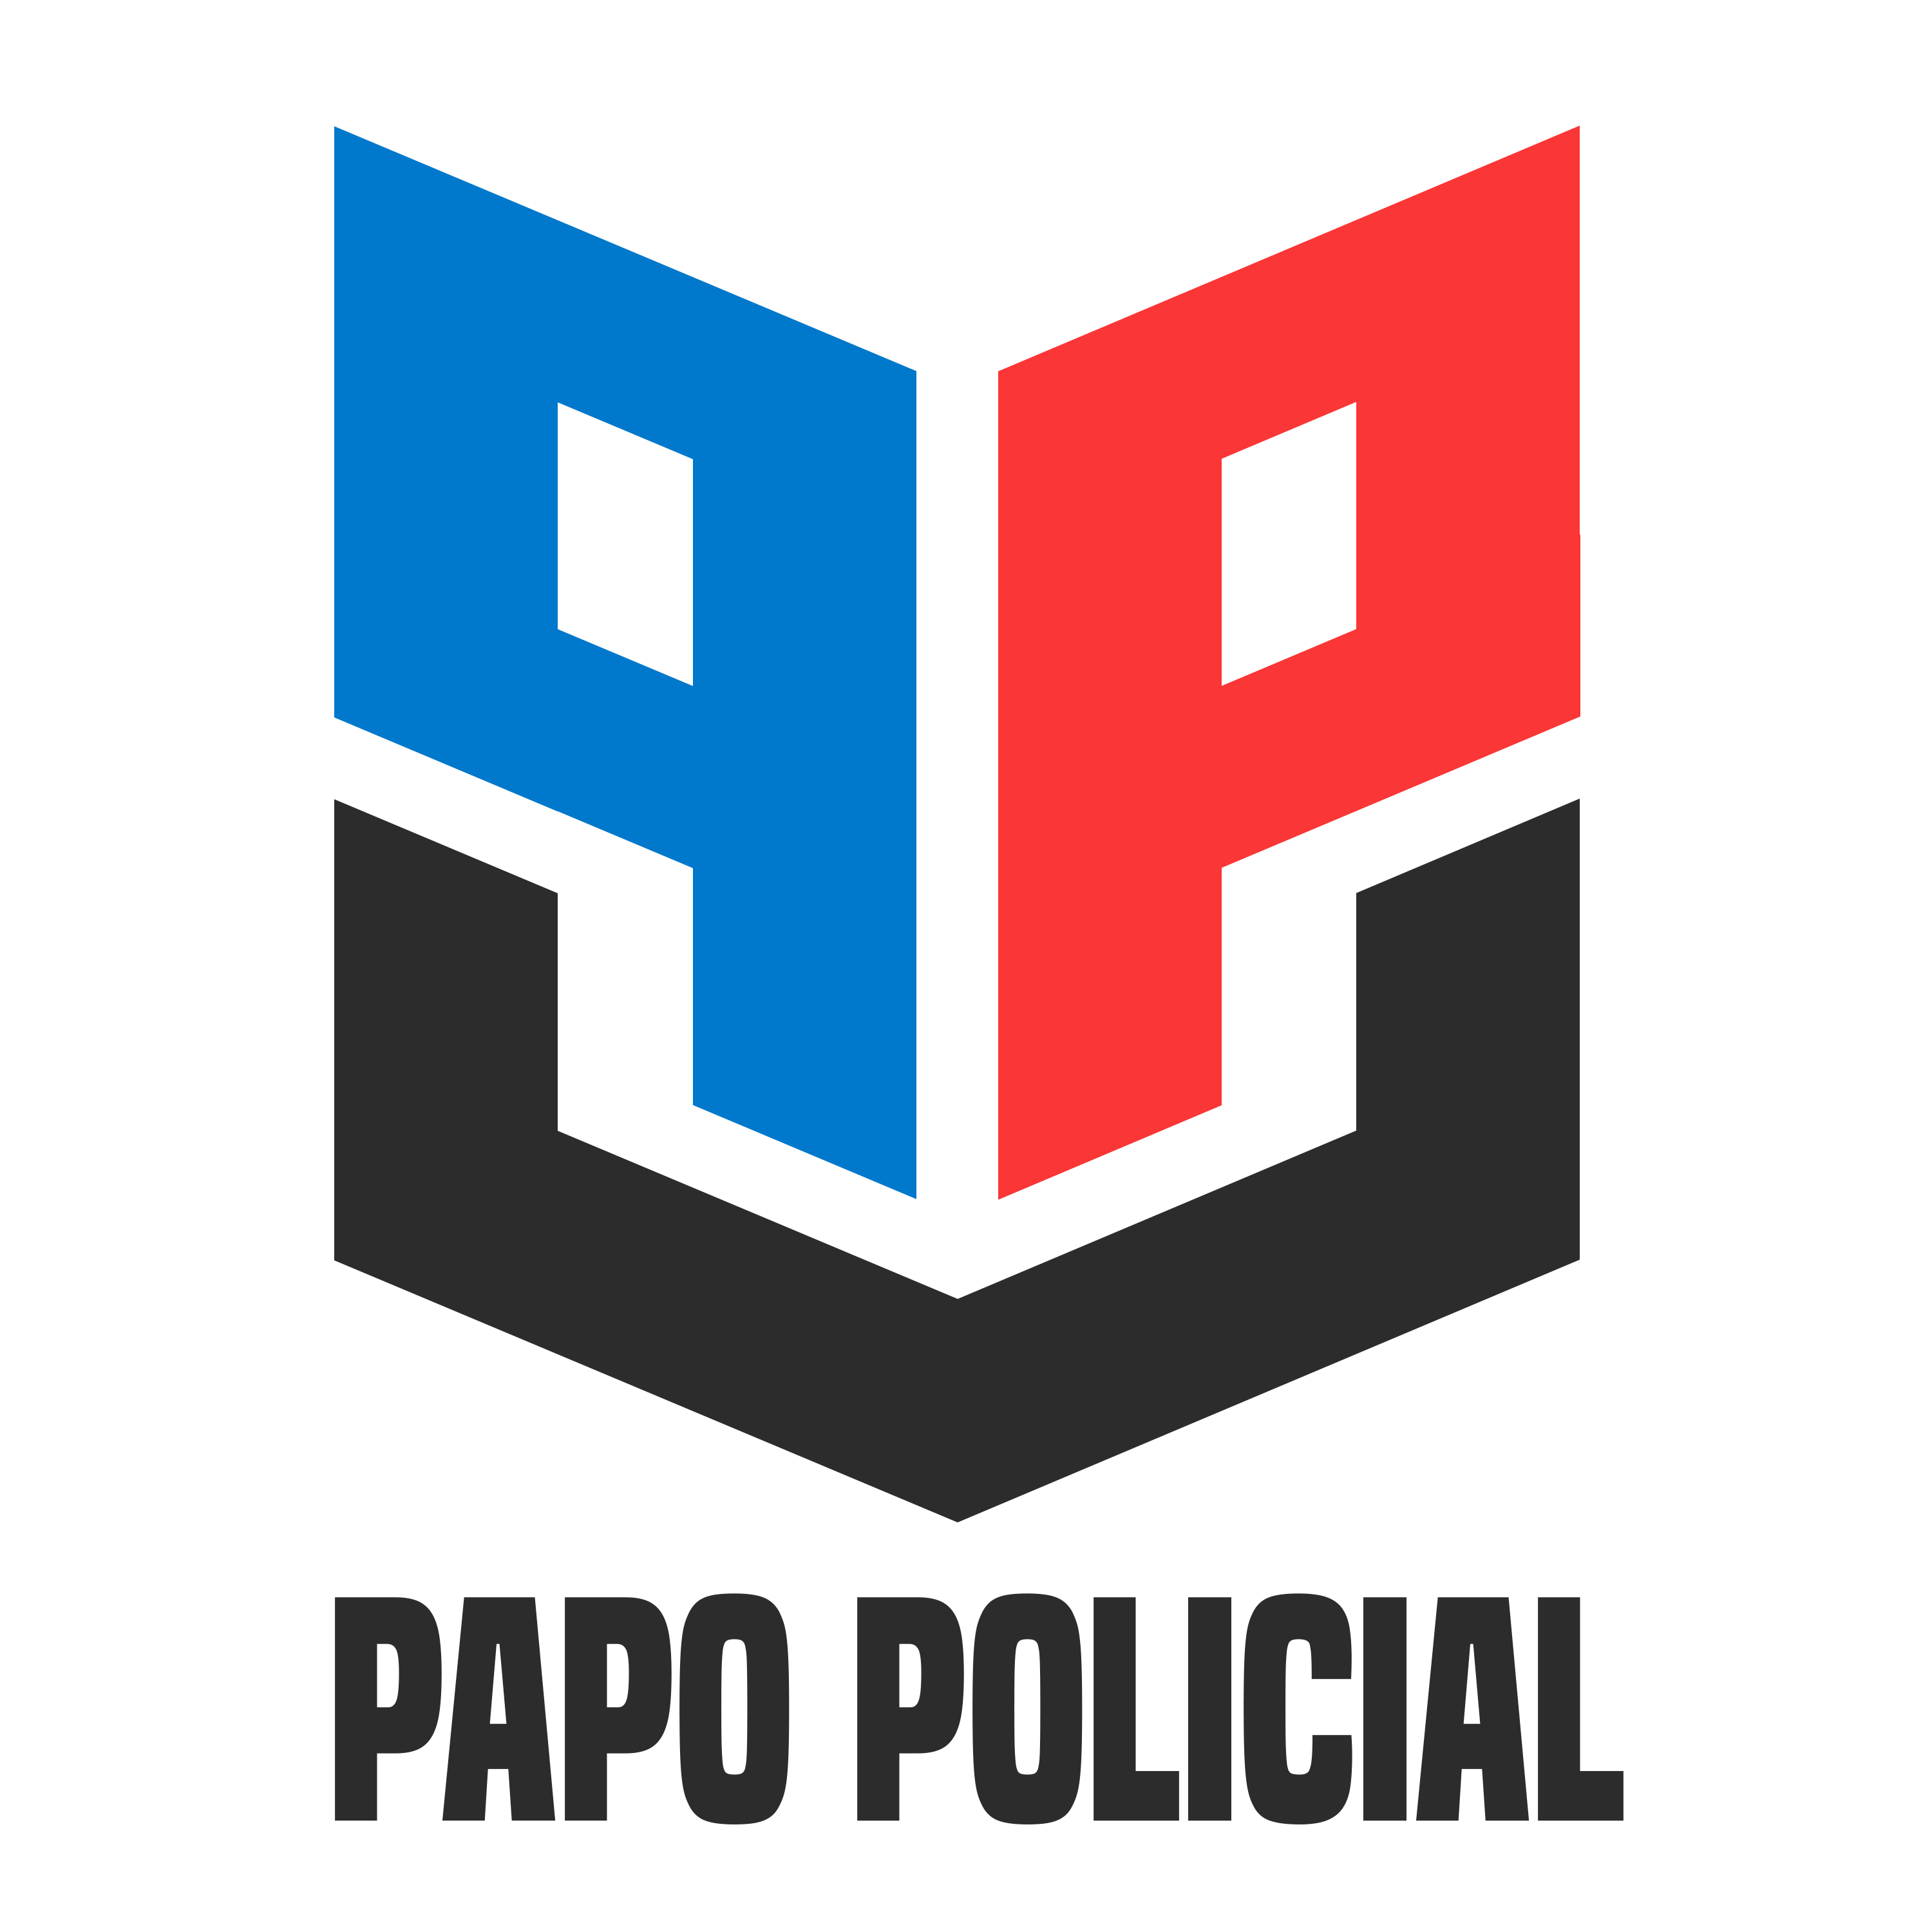 Papo Policial